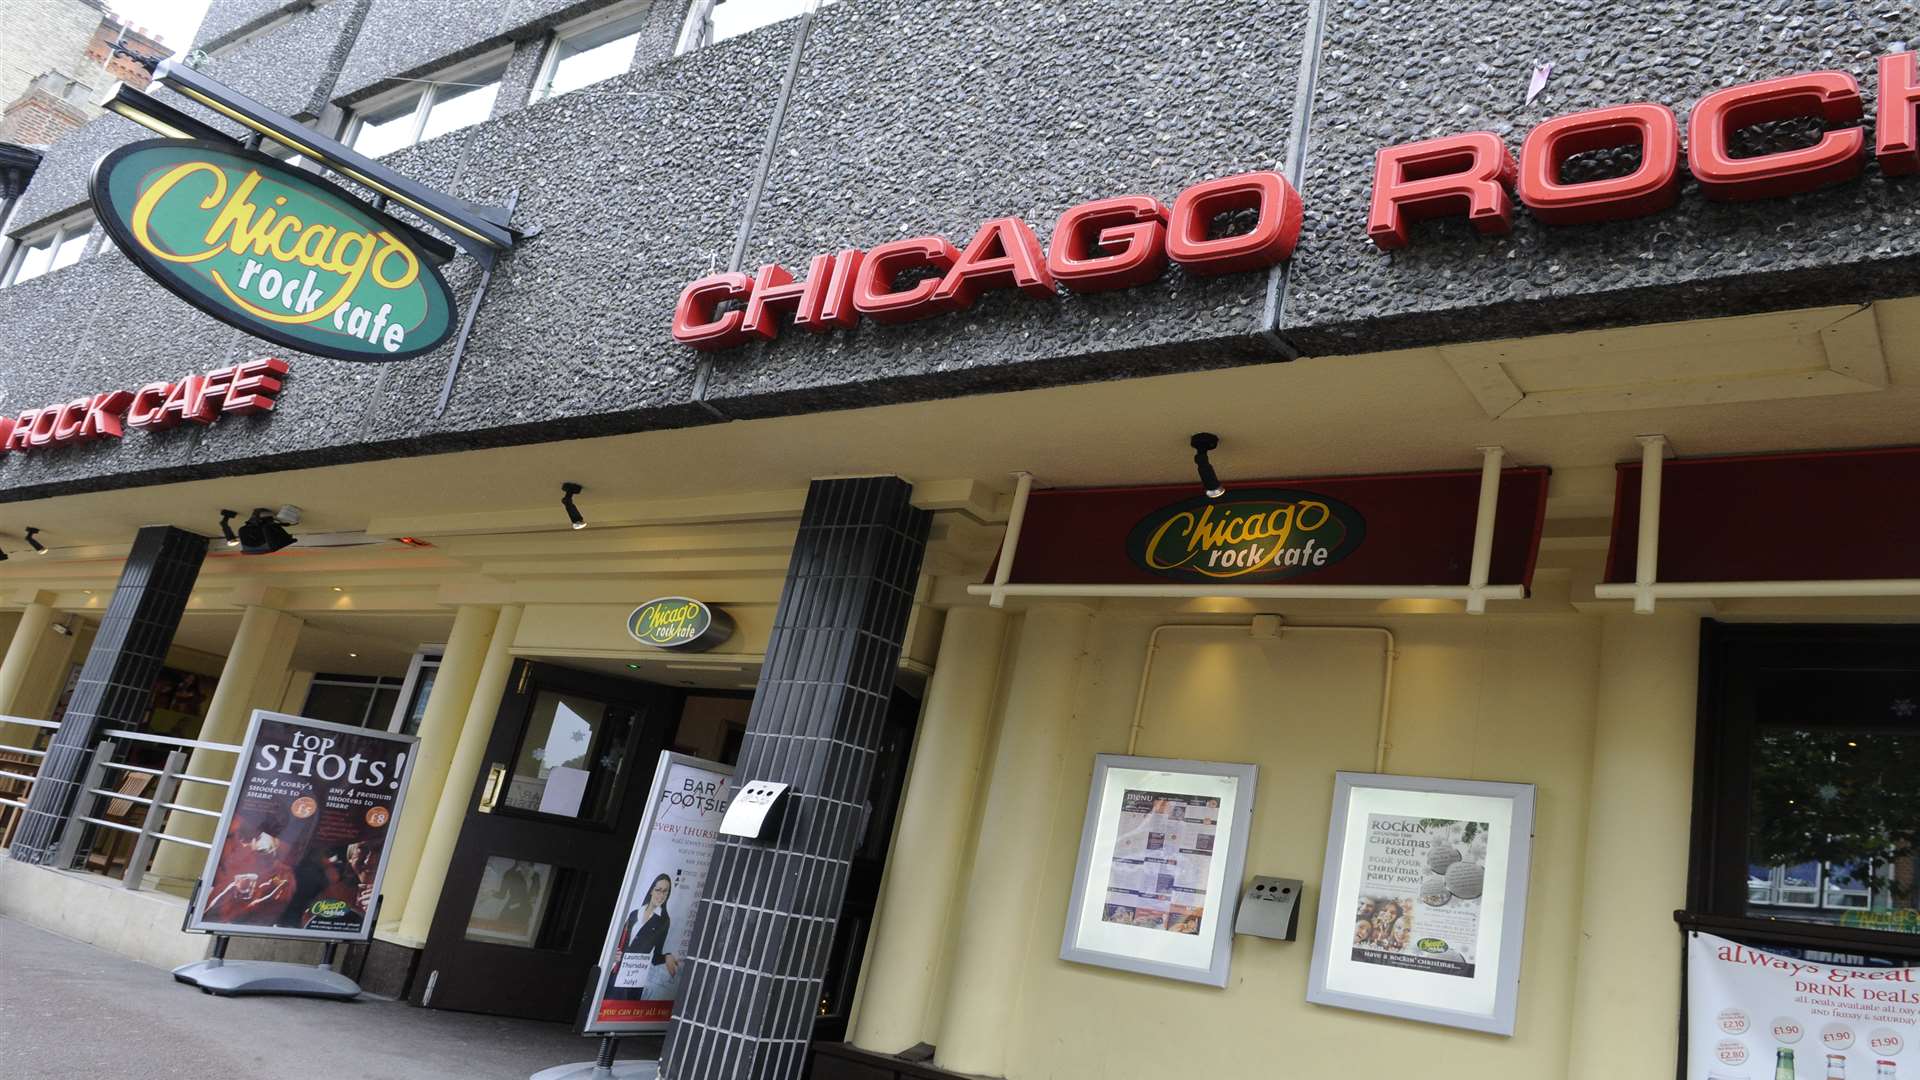 Chicago Rock Cafe in Maidstone High Street